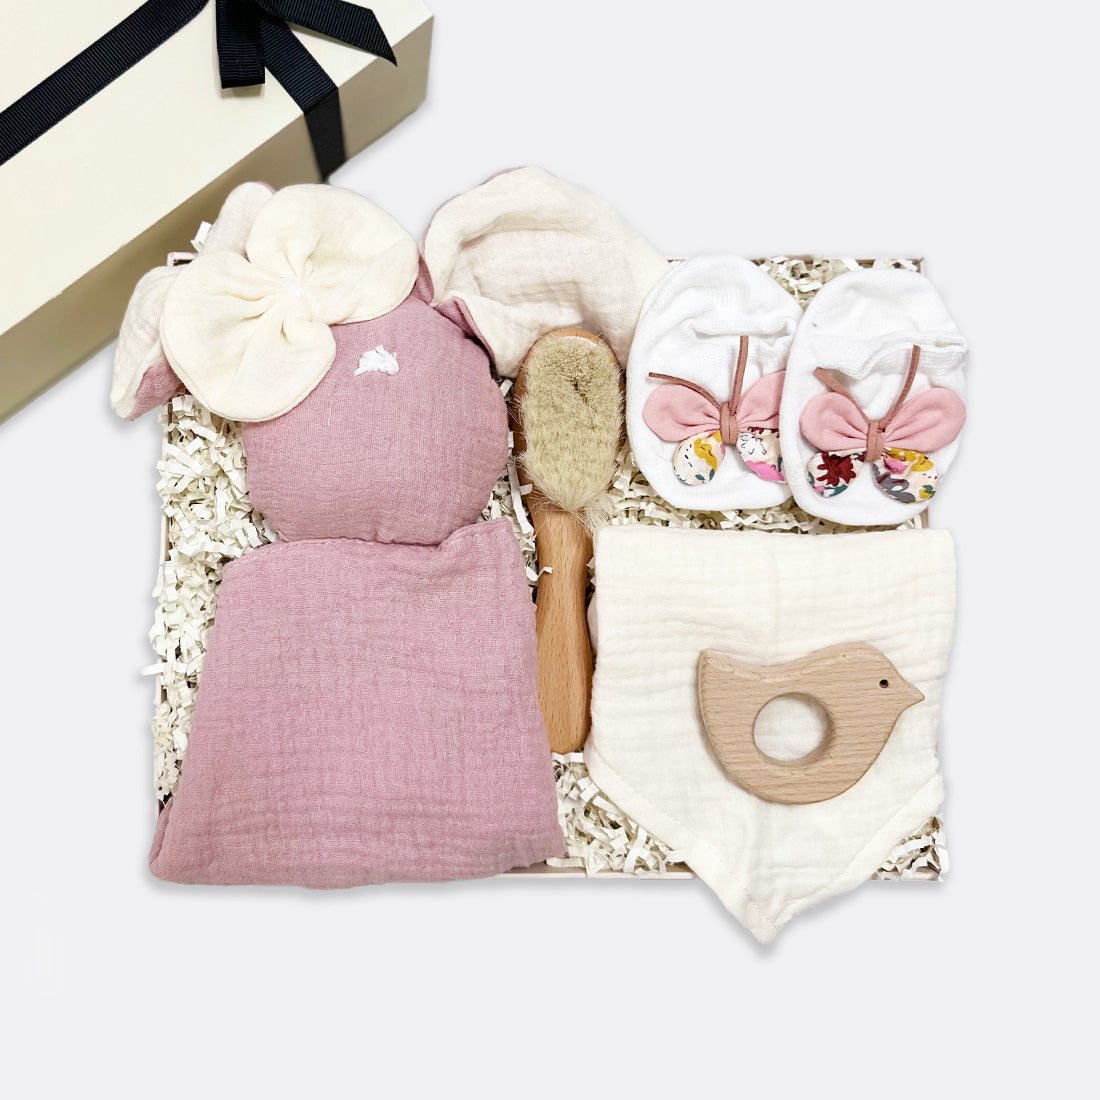 Soft Bunny |Pink Baby Brush Bandana Style Bib | Off-White Bird Teether Bow Socks | Floral (from birth up to 9 months), shop the best Christmas gift gifts for her for him from Inna carton online store dubai, UAE!